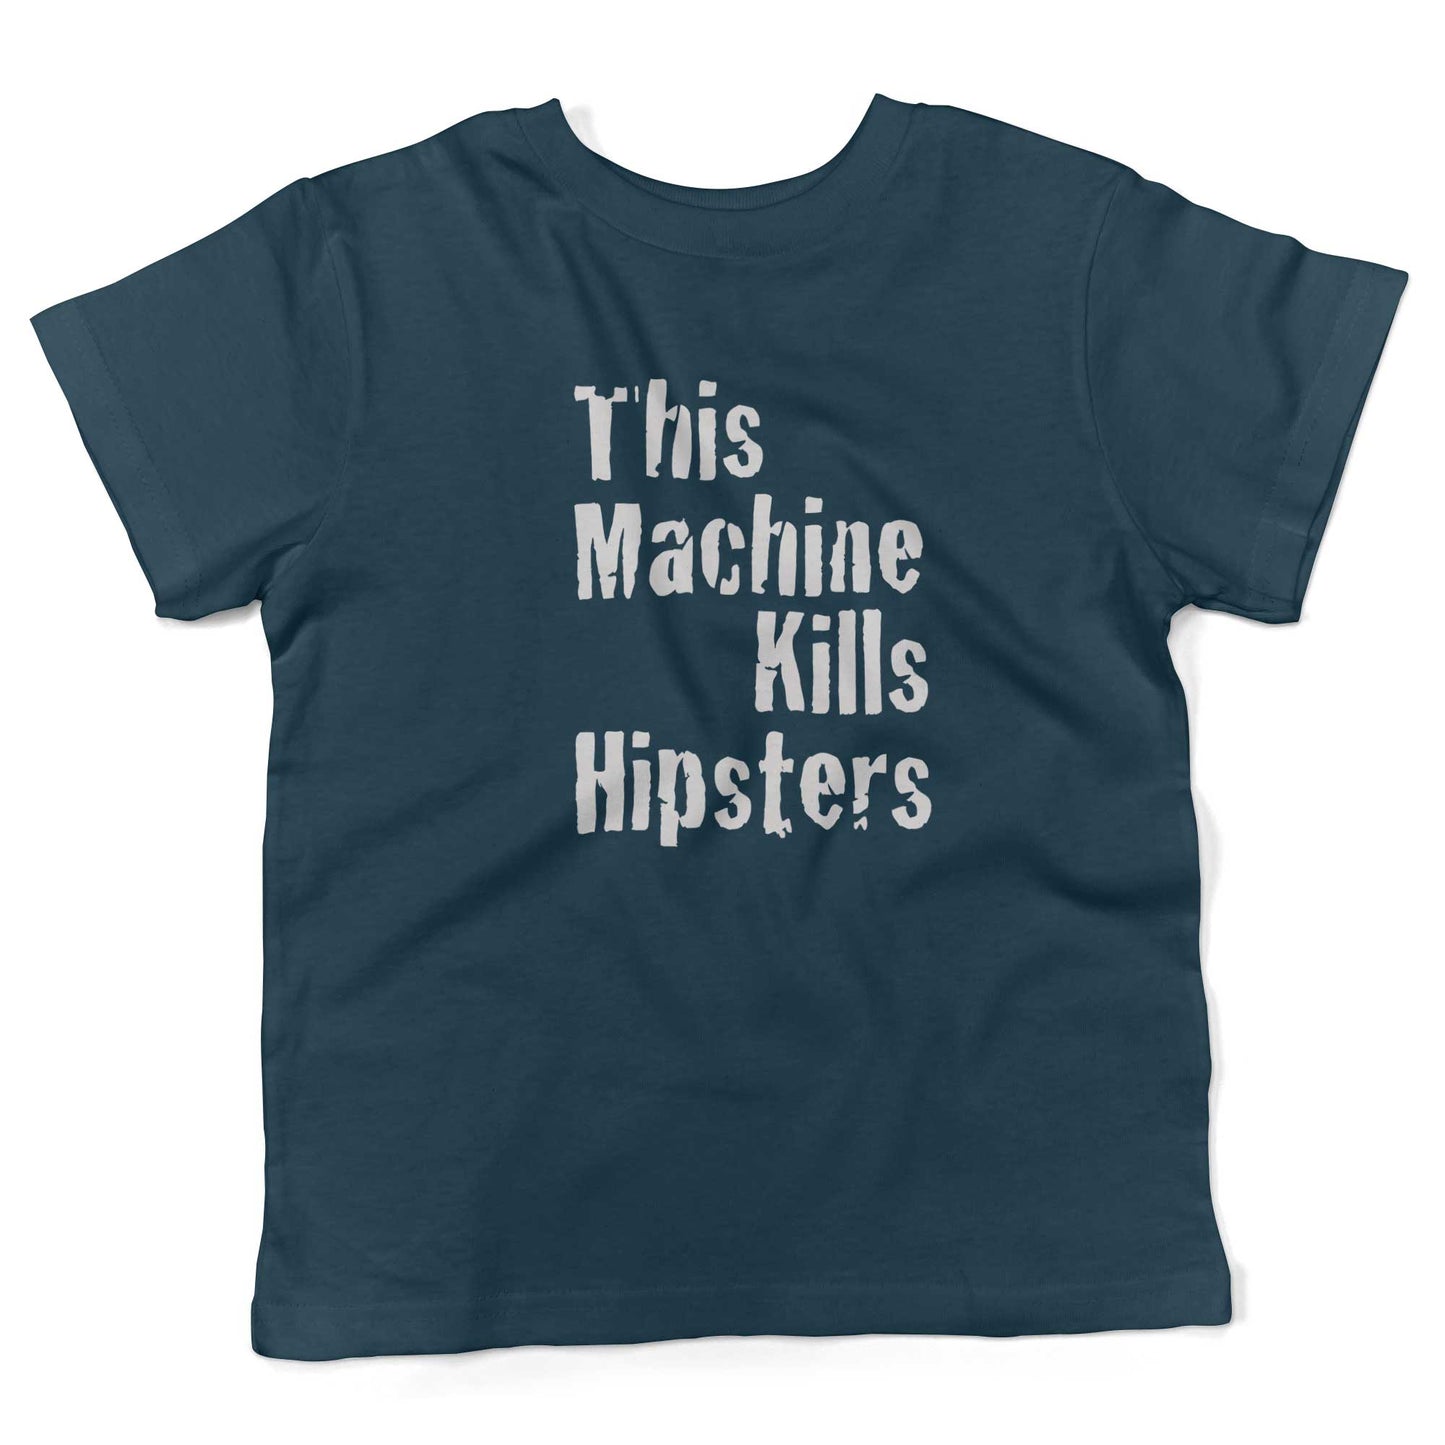 This Machine Kills Hipsters Toddler Shirt-Organic Pacific Blue-2T